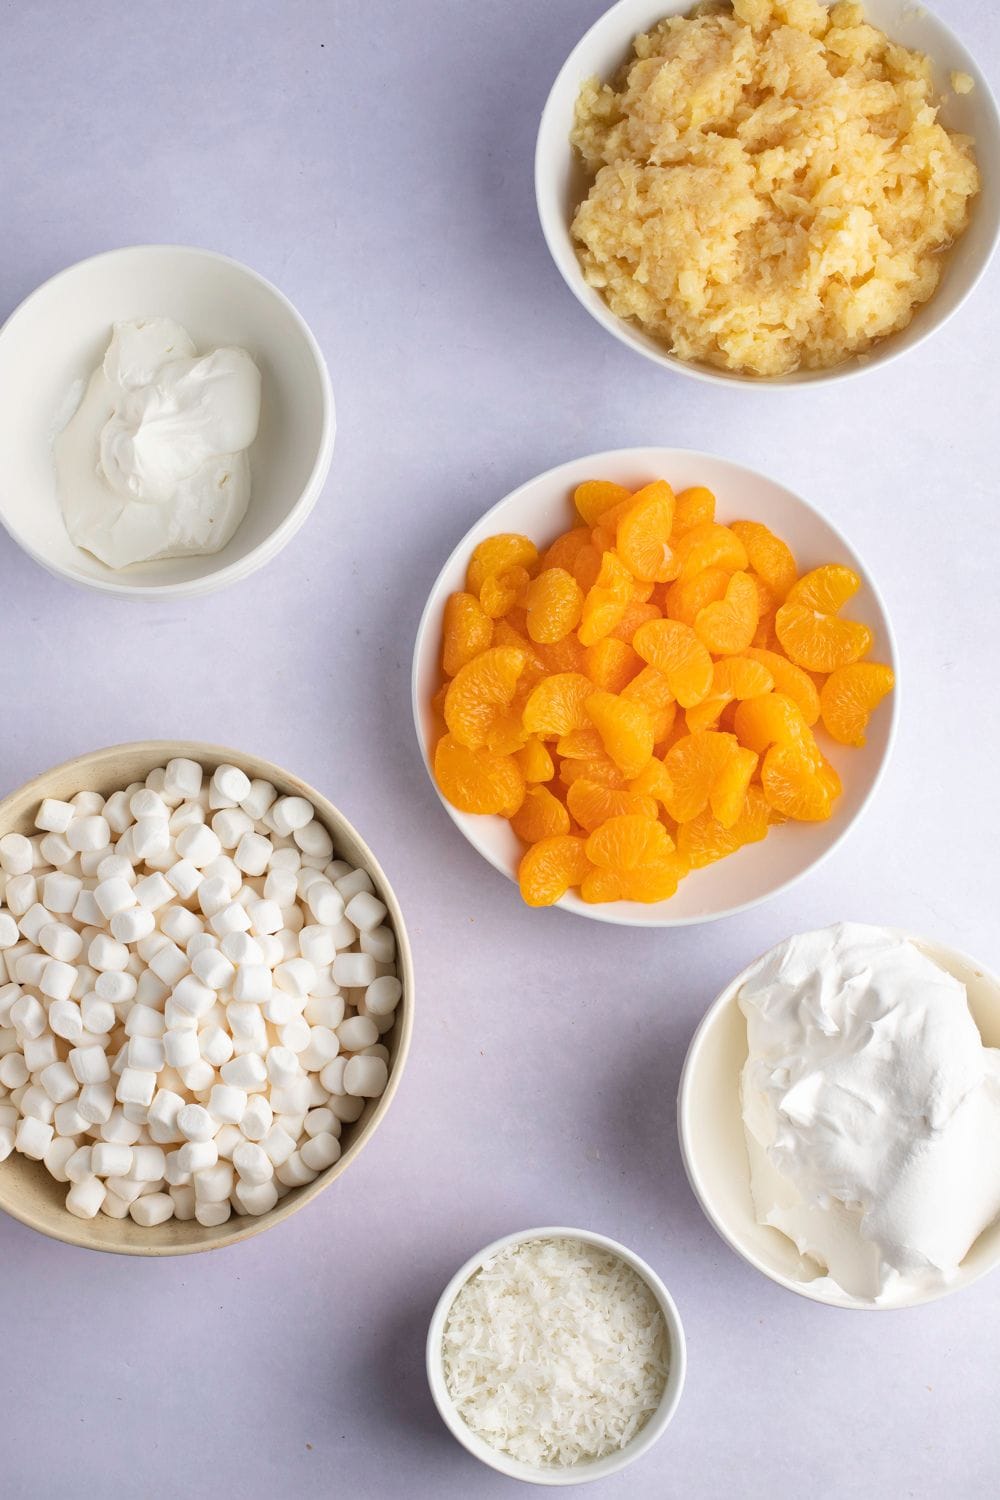 Ambrosia Fruit Salad Ingredients - Canned Pineapple and Mandarin Oranges, Shredded Coconut, Cool Whip, Sour Cream and Mini-Marshmallows